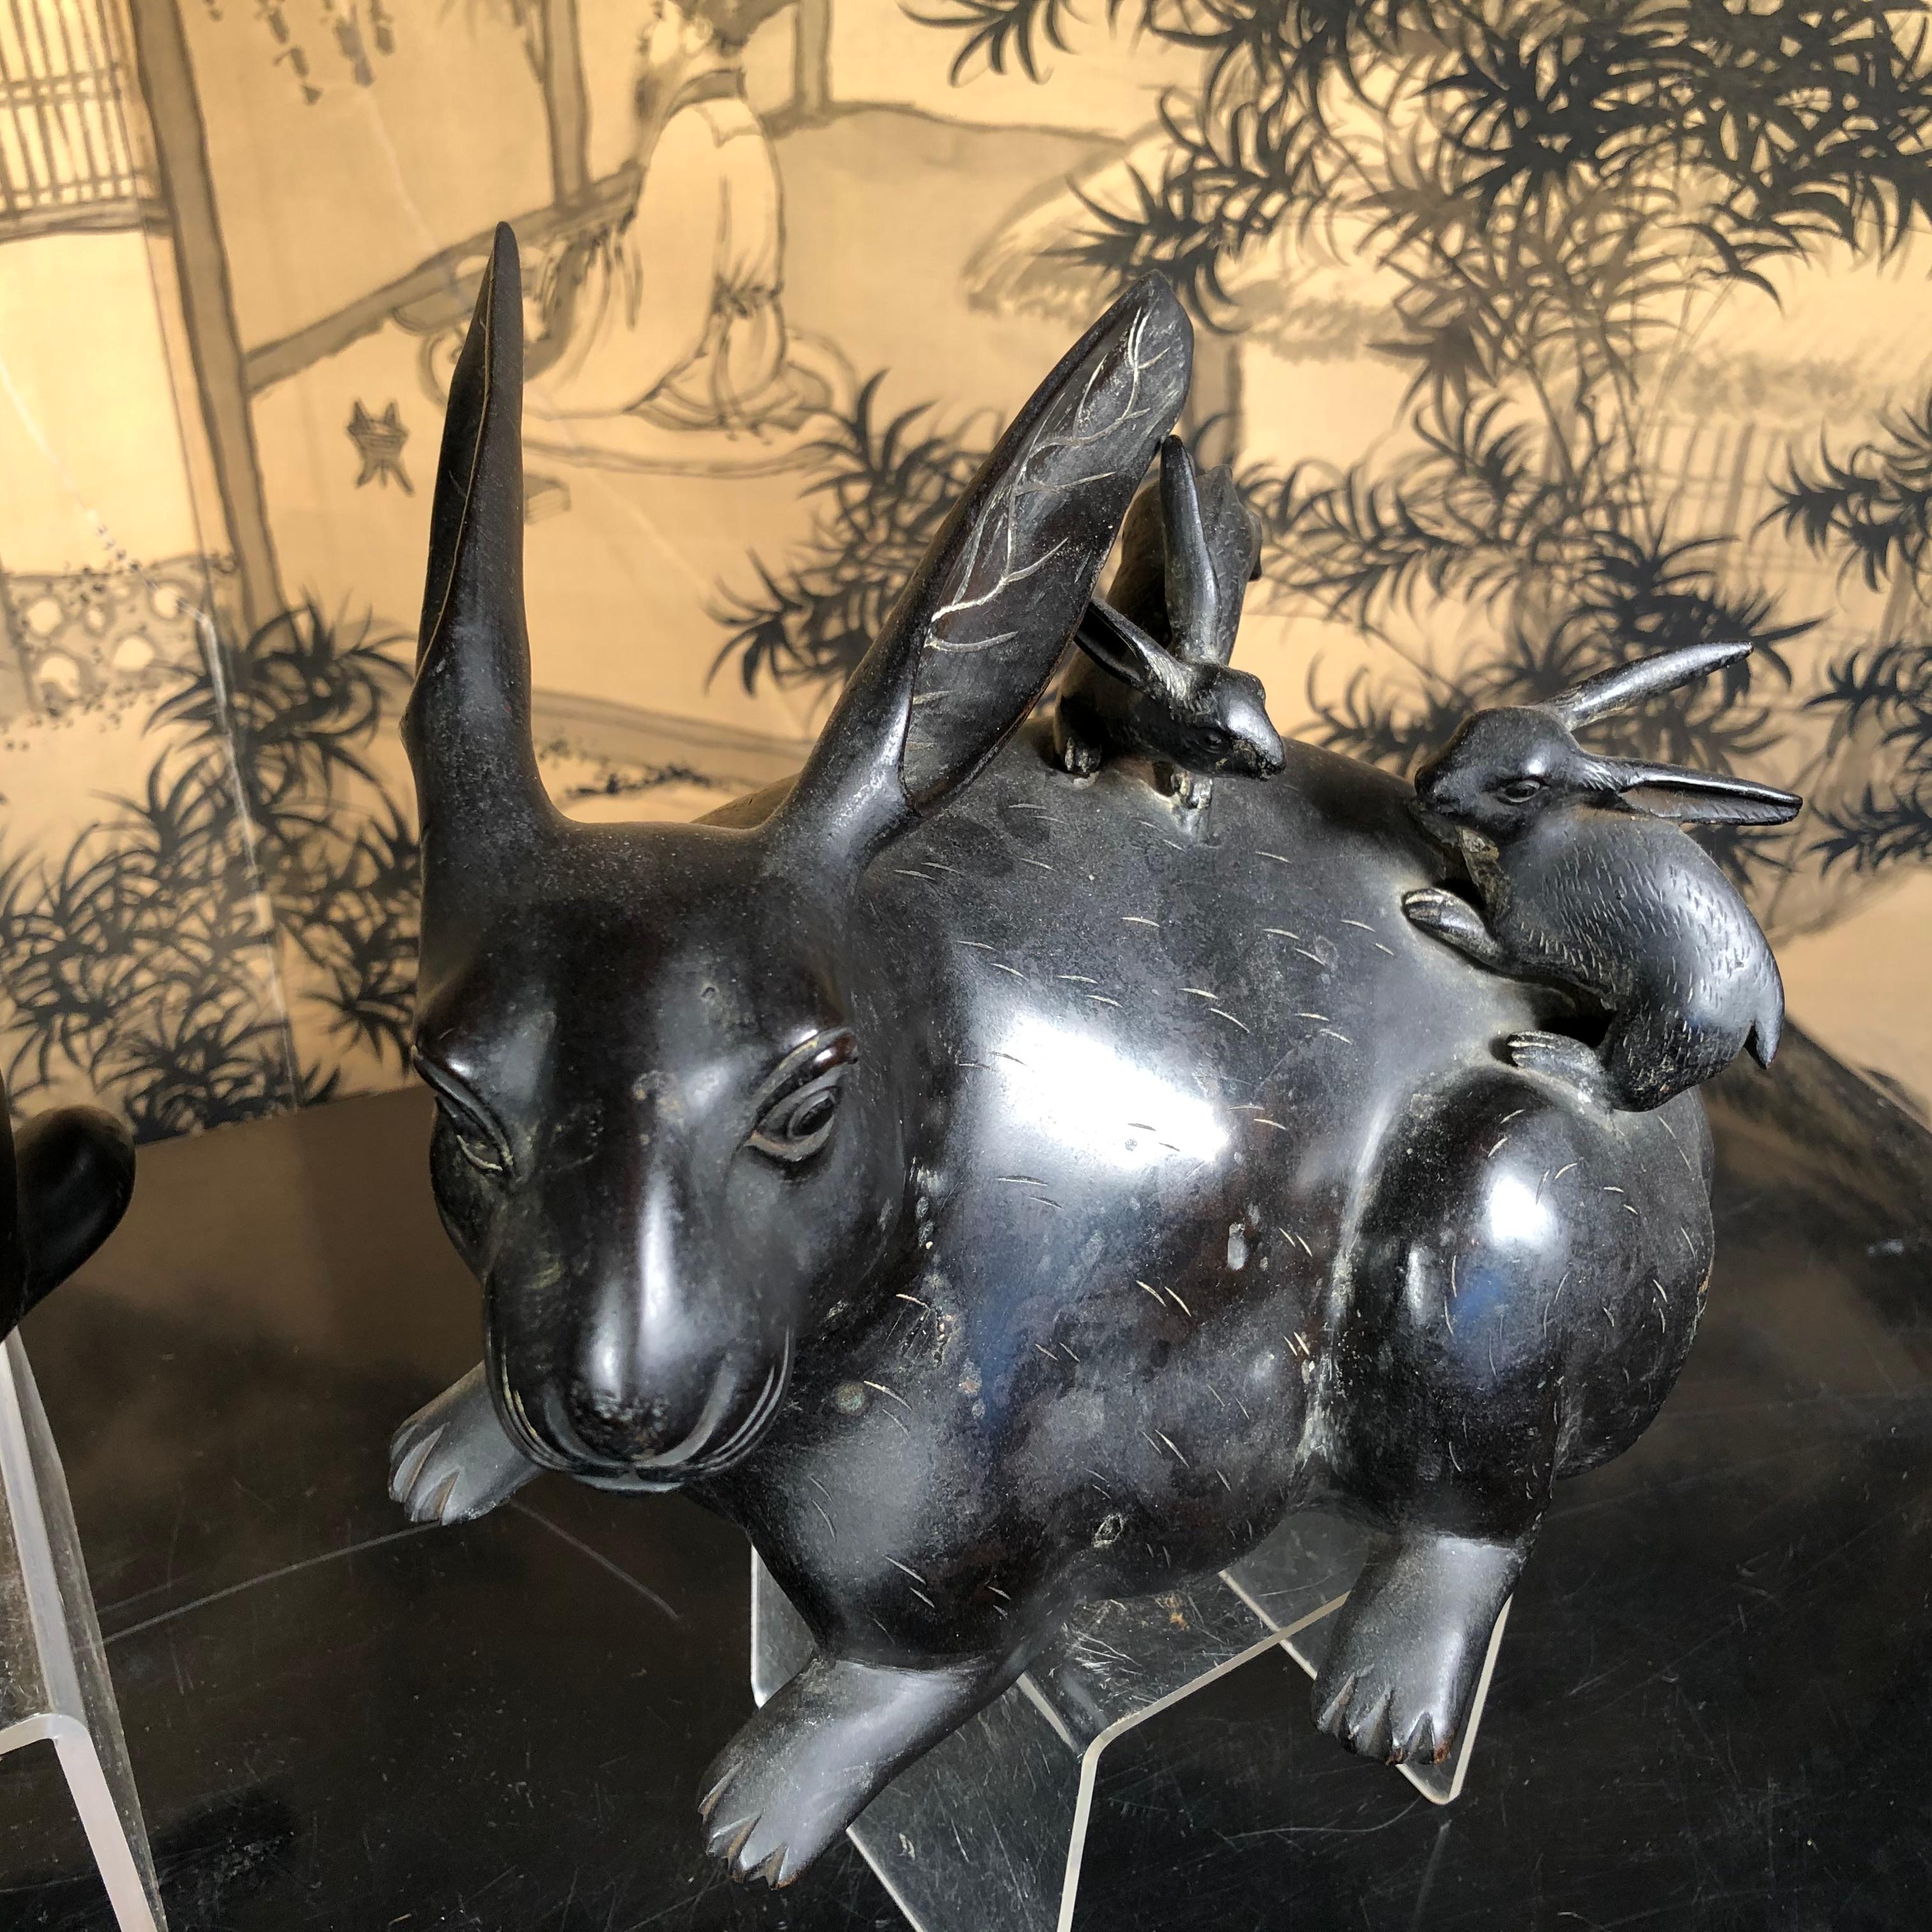 From our recent Japanese acquisition coming from an important Japanese collector of rabbit usagi sculptures

His finest and largest rabbits from Taisho period, 1920. 

This is a remarkable Japanese one-of-a-kind group in both large scale and finest